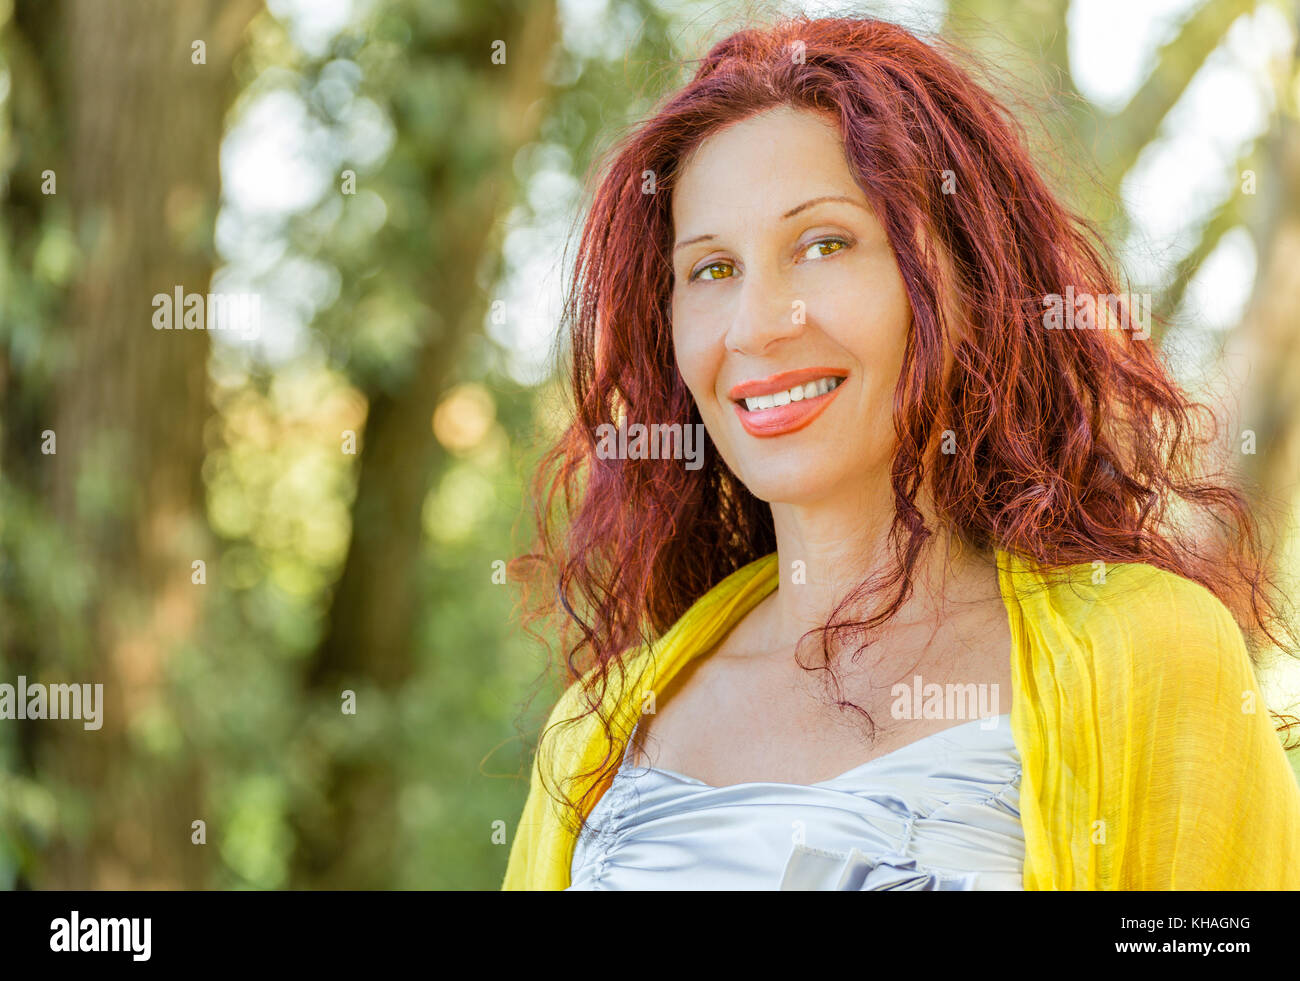 portrait of German mature woman with yellow  shawl and silver top smiling in a green garden Stock Photo